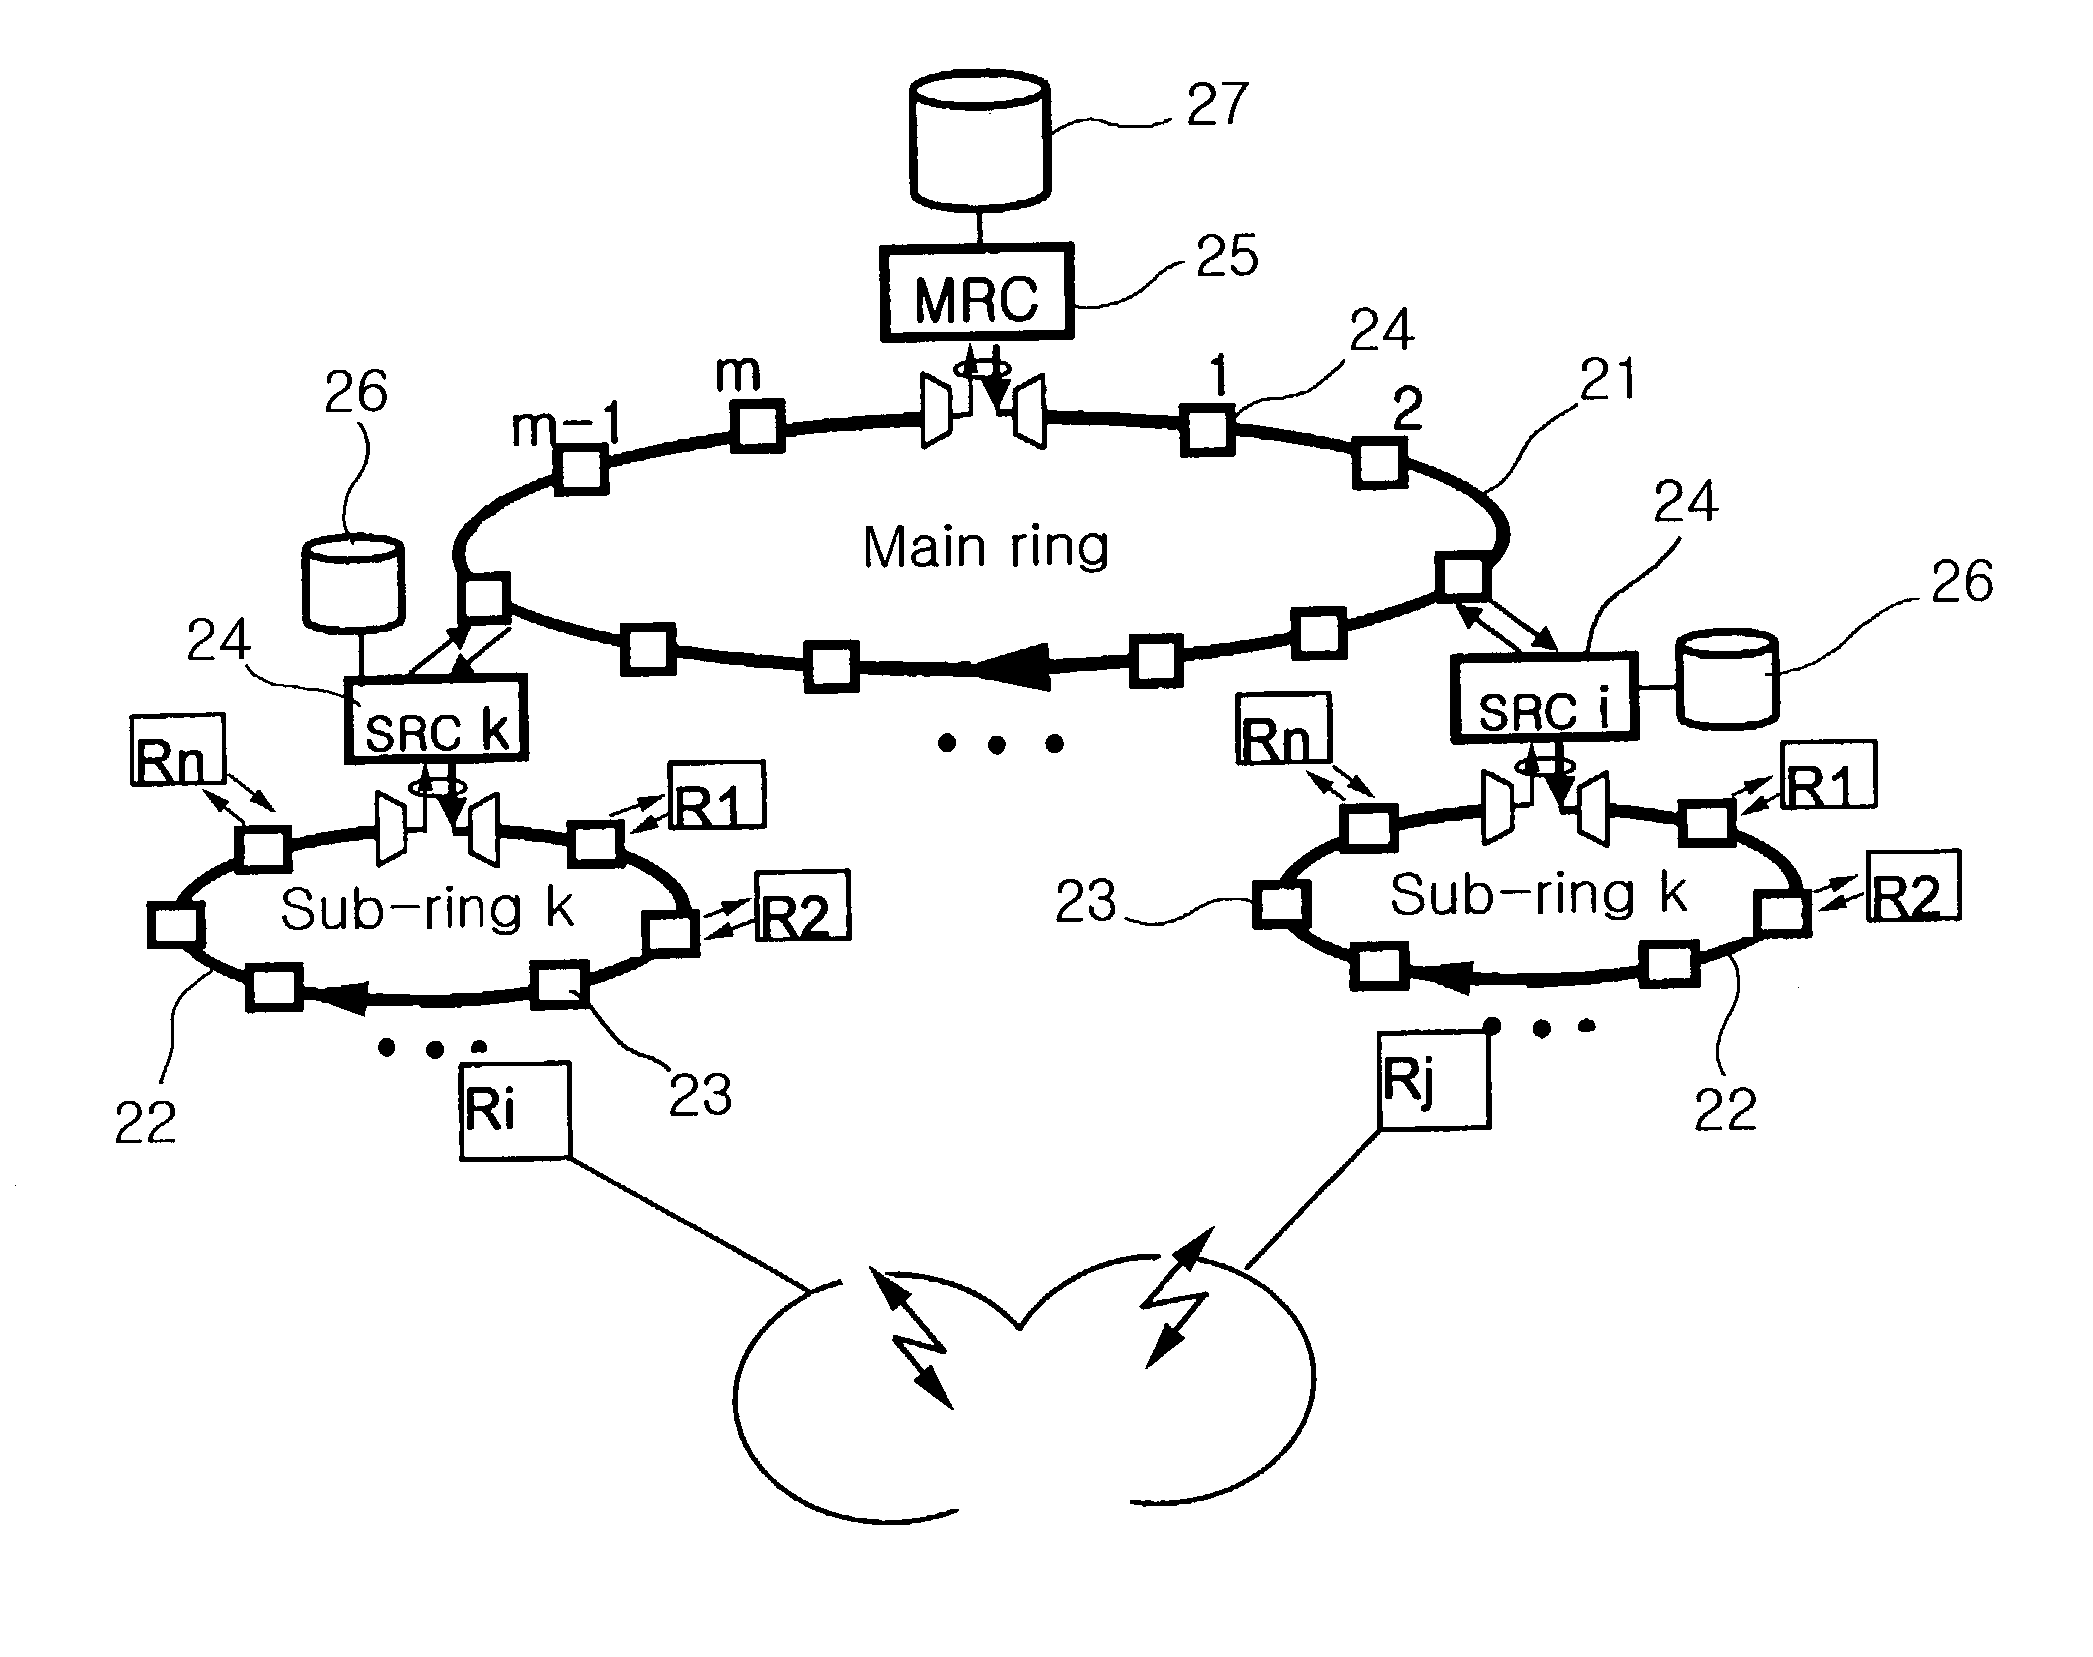 Method for transmitting packet in wireless access network based on wavelength identification code scheme